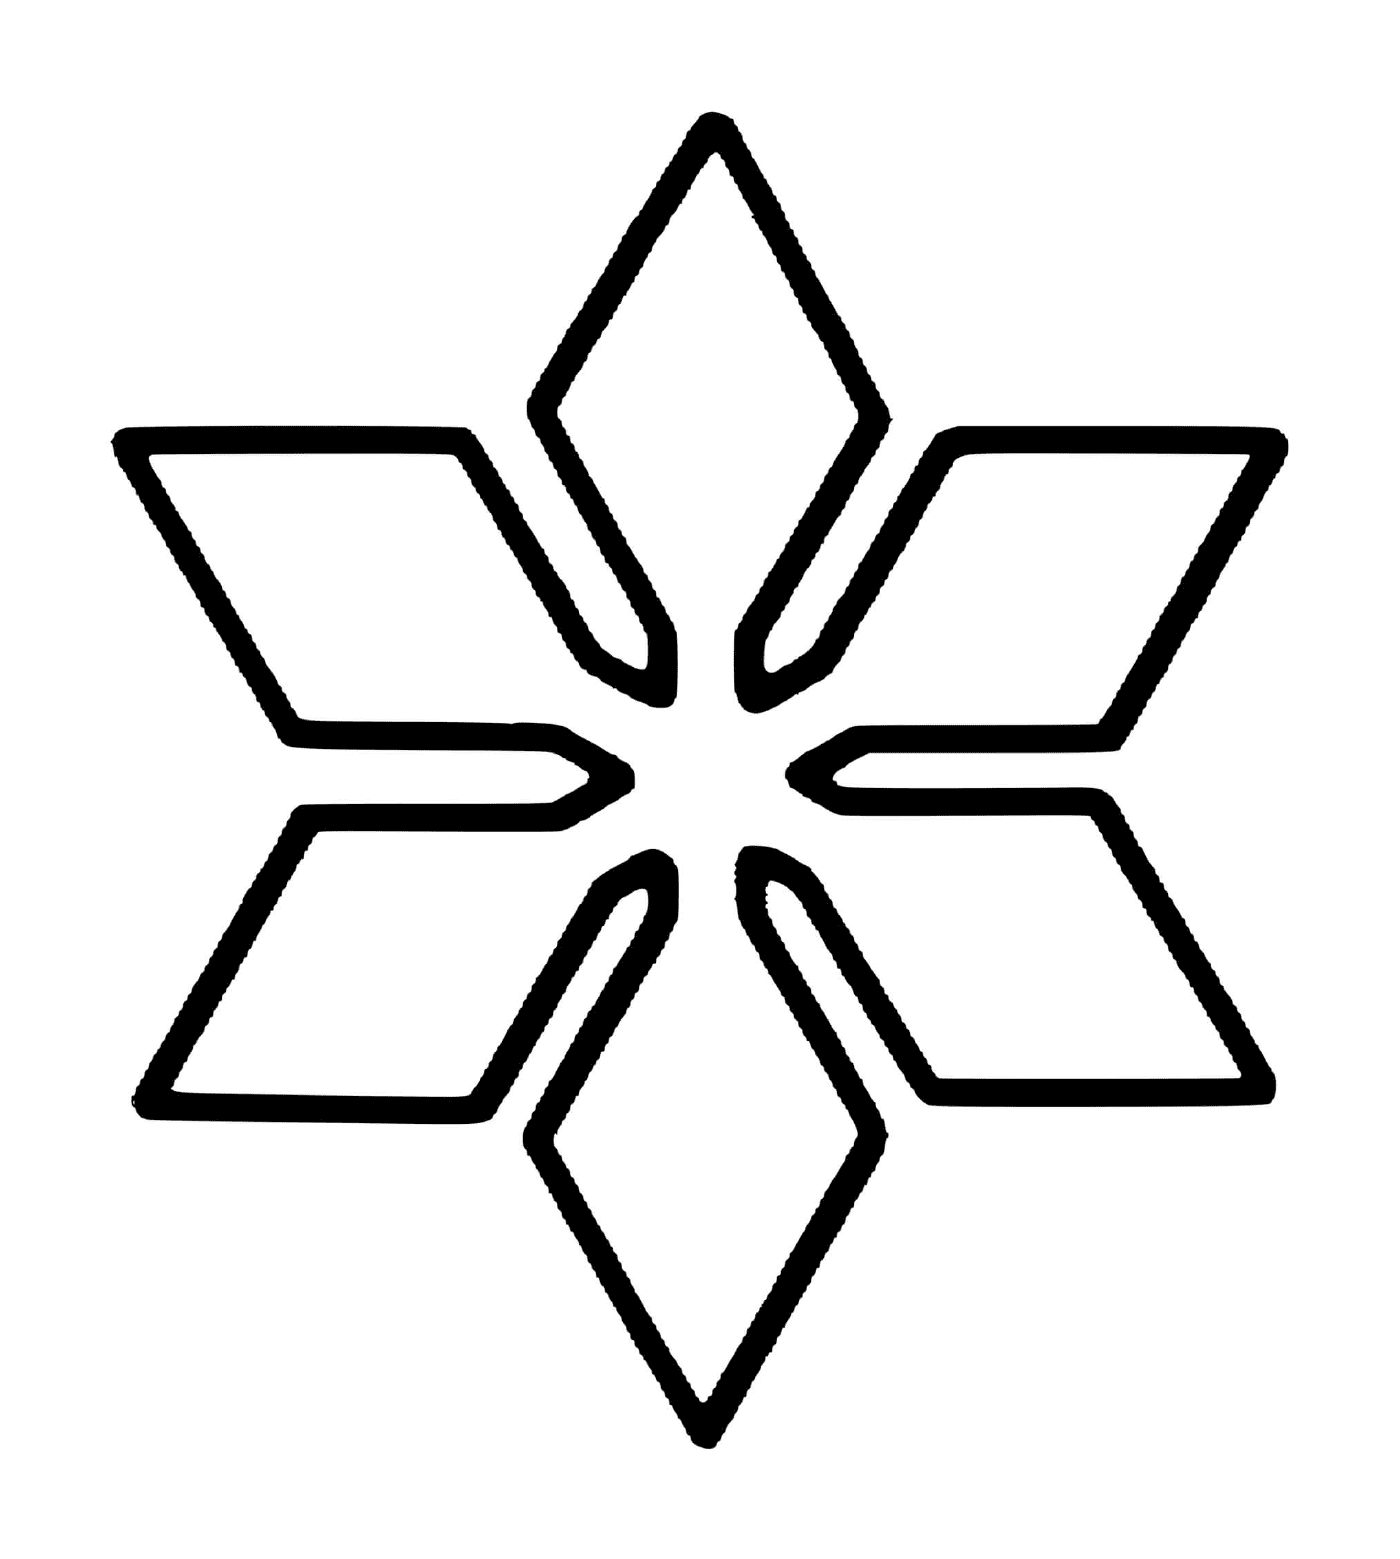  A simple and easy snowflake 